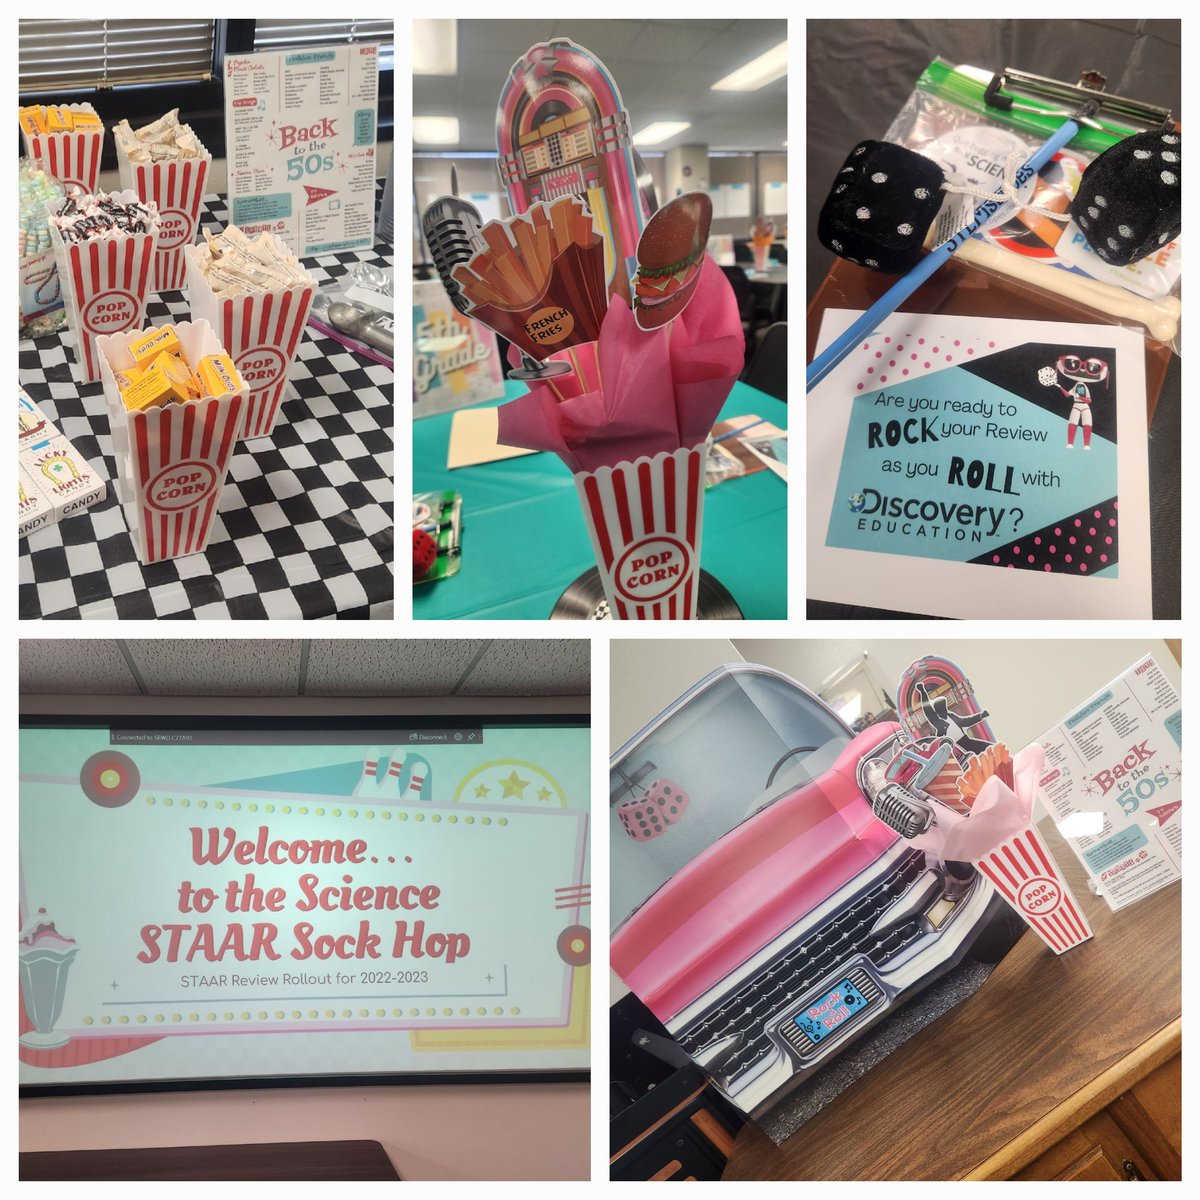 We are ready to Shake, Rattle, and Roll STAAR at our Science STAAR Sock Hop! 5th, 8th, and Bio teachers... we can't wait to show you everything we've made! @EctorCountyISD @drliliananez @ECISD_T2L